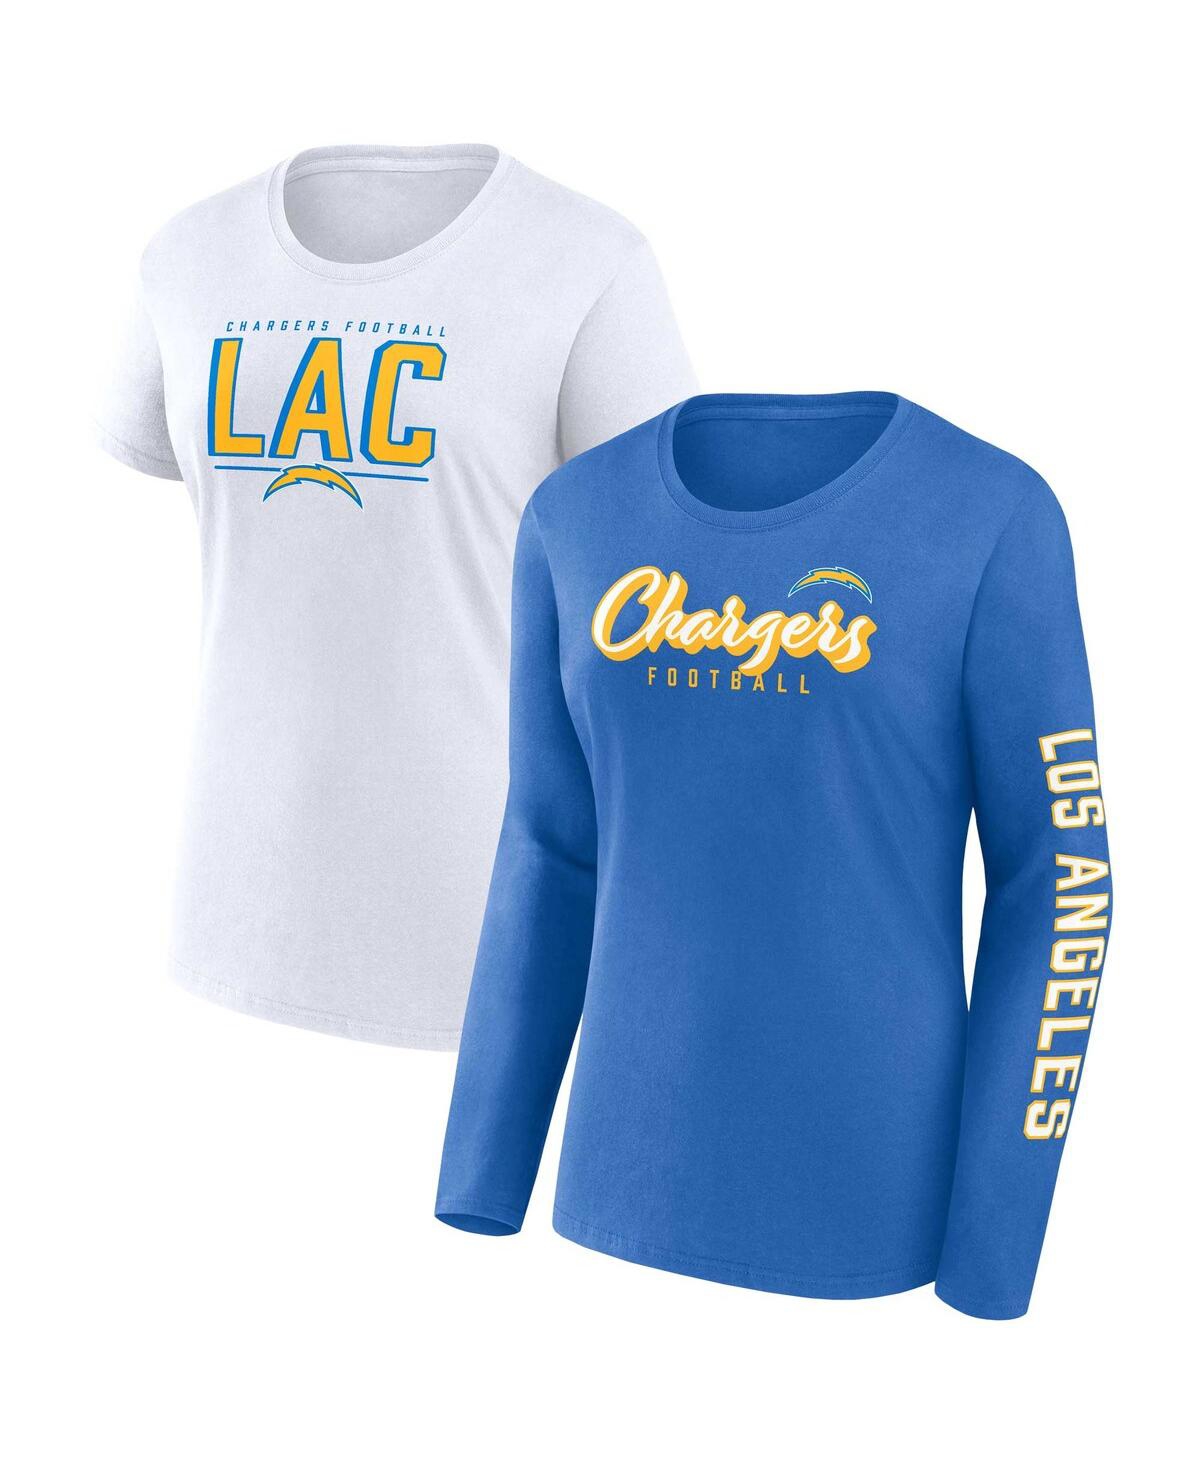 Fanatics Women's  Powder Blue, White Los Angeles Chargers Two-pack Combo Cheerleaderâ T-shirt Set In Powder Blue,white